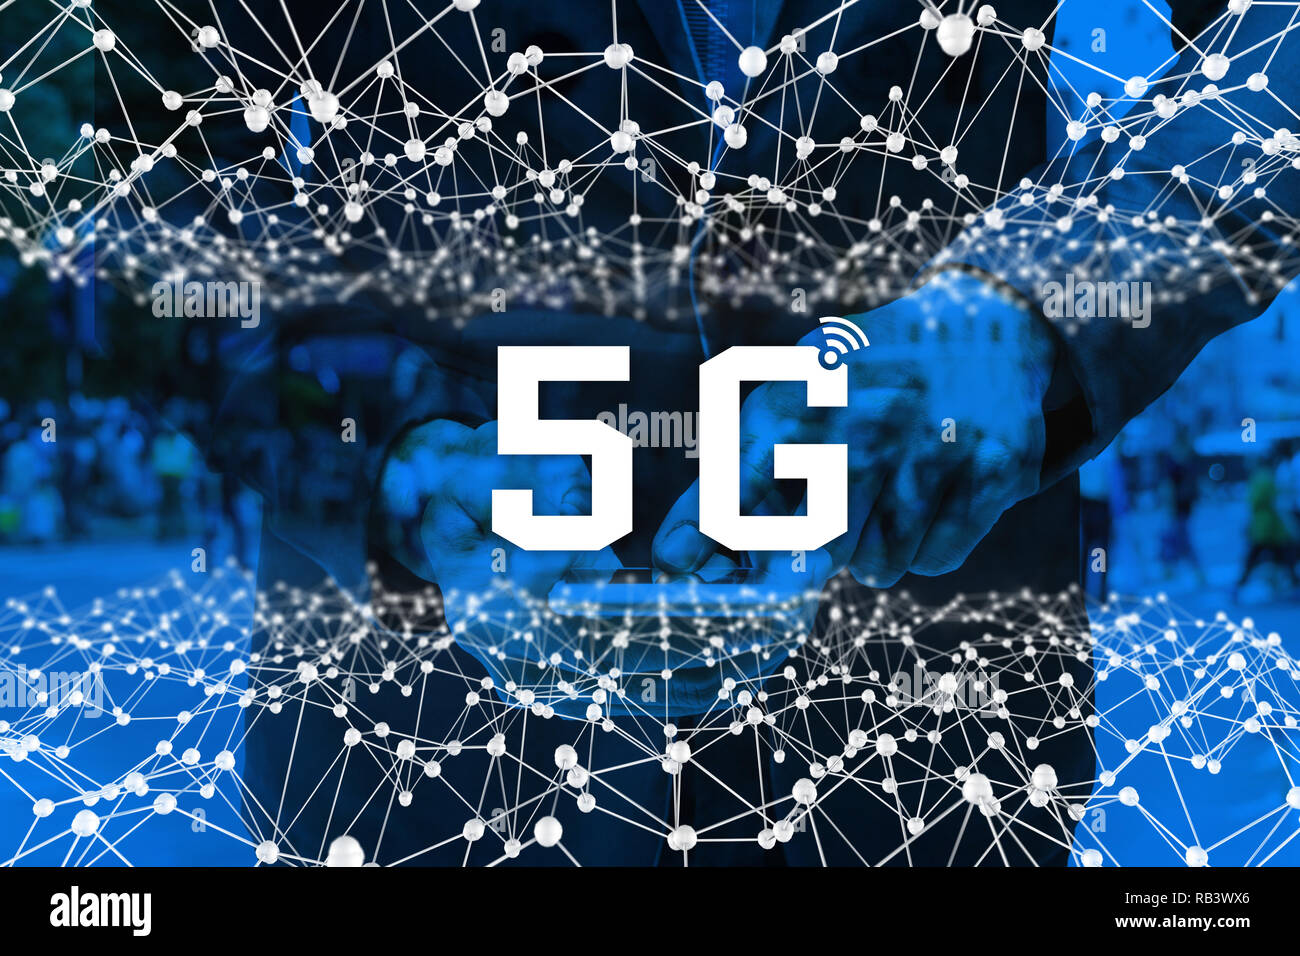 Connecting to super-fast Internet speed with 5G technology is becoming the top concern for everyone. Check out the image related to this keyword to learn more about how to connect and use 5G in modern technology.